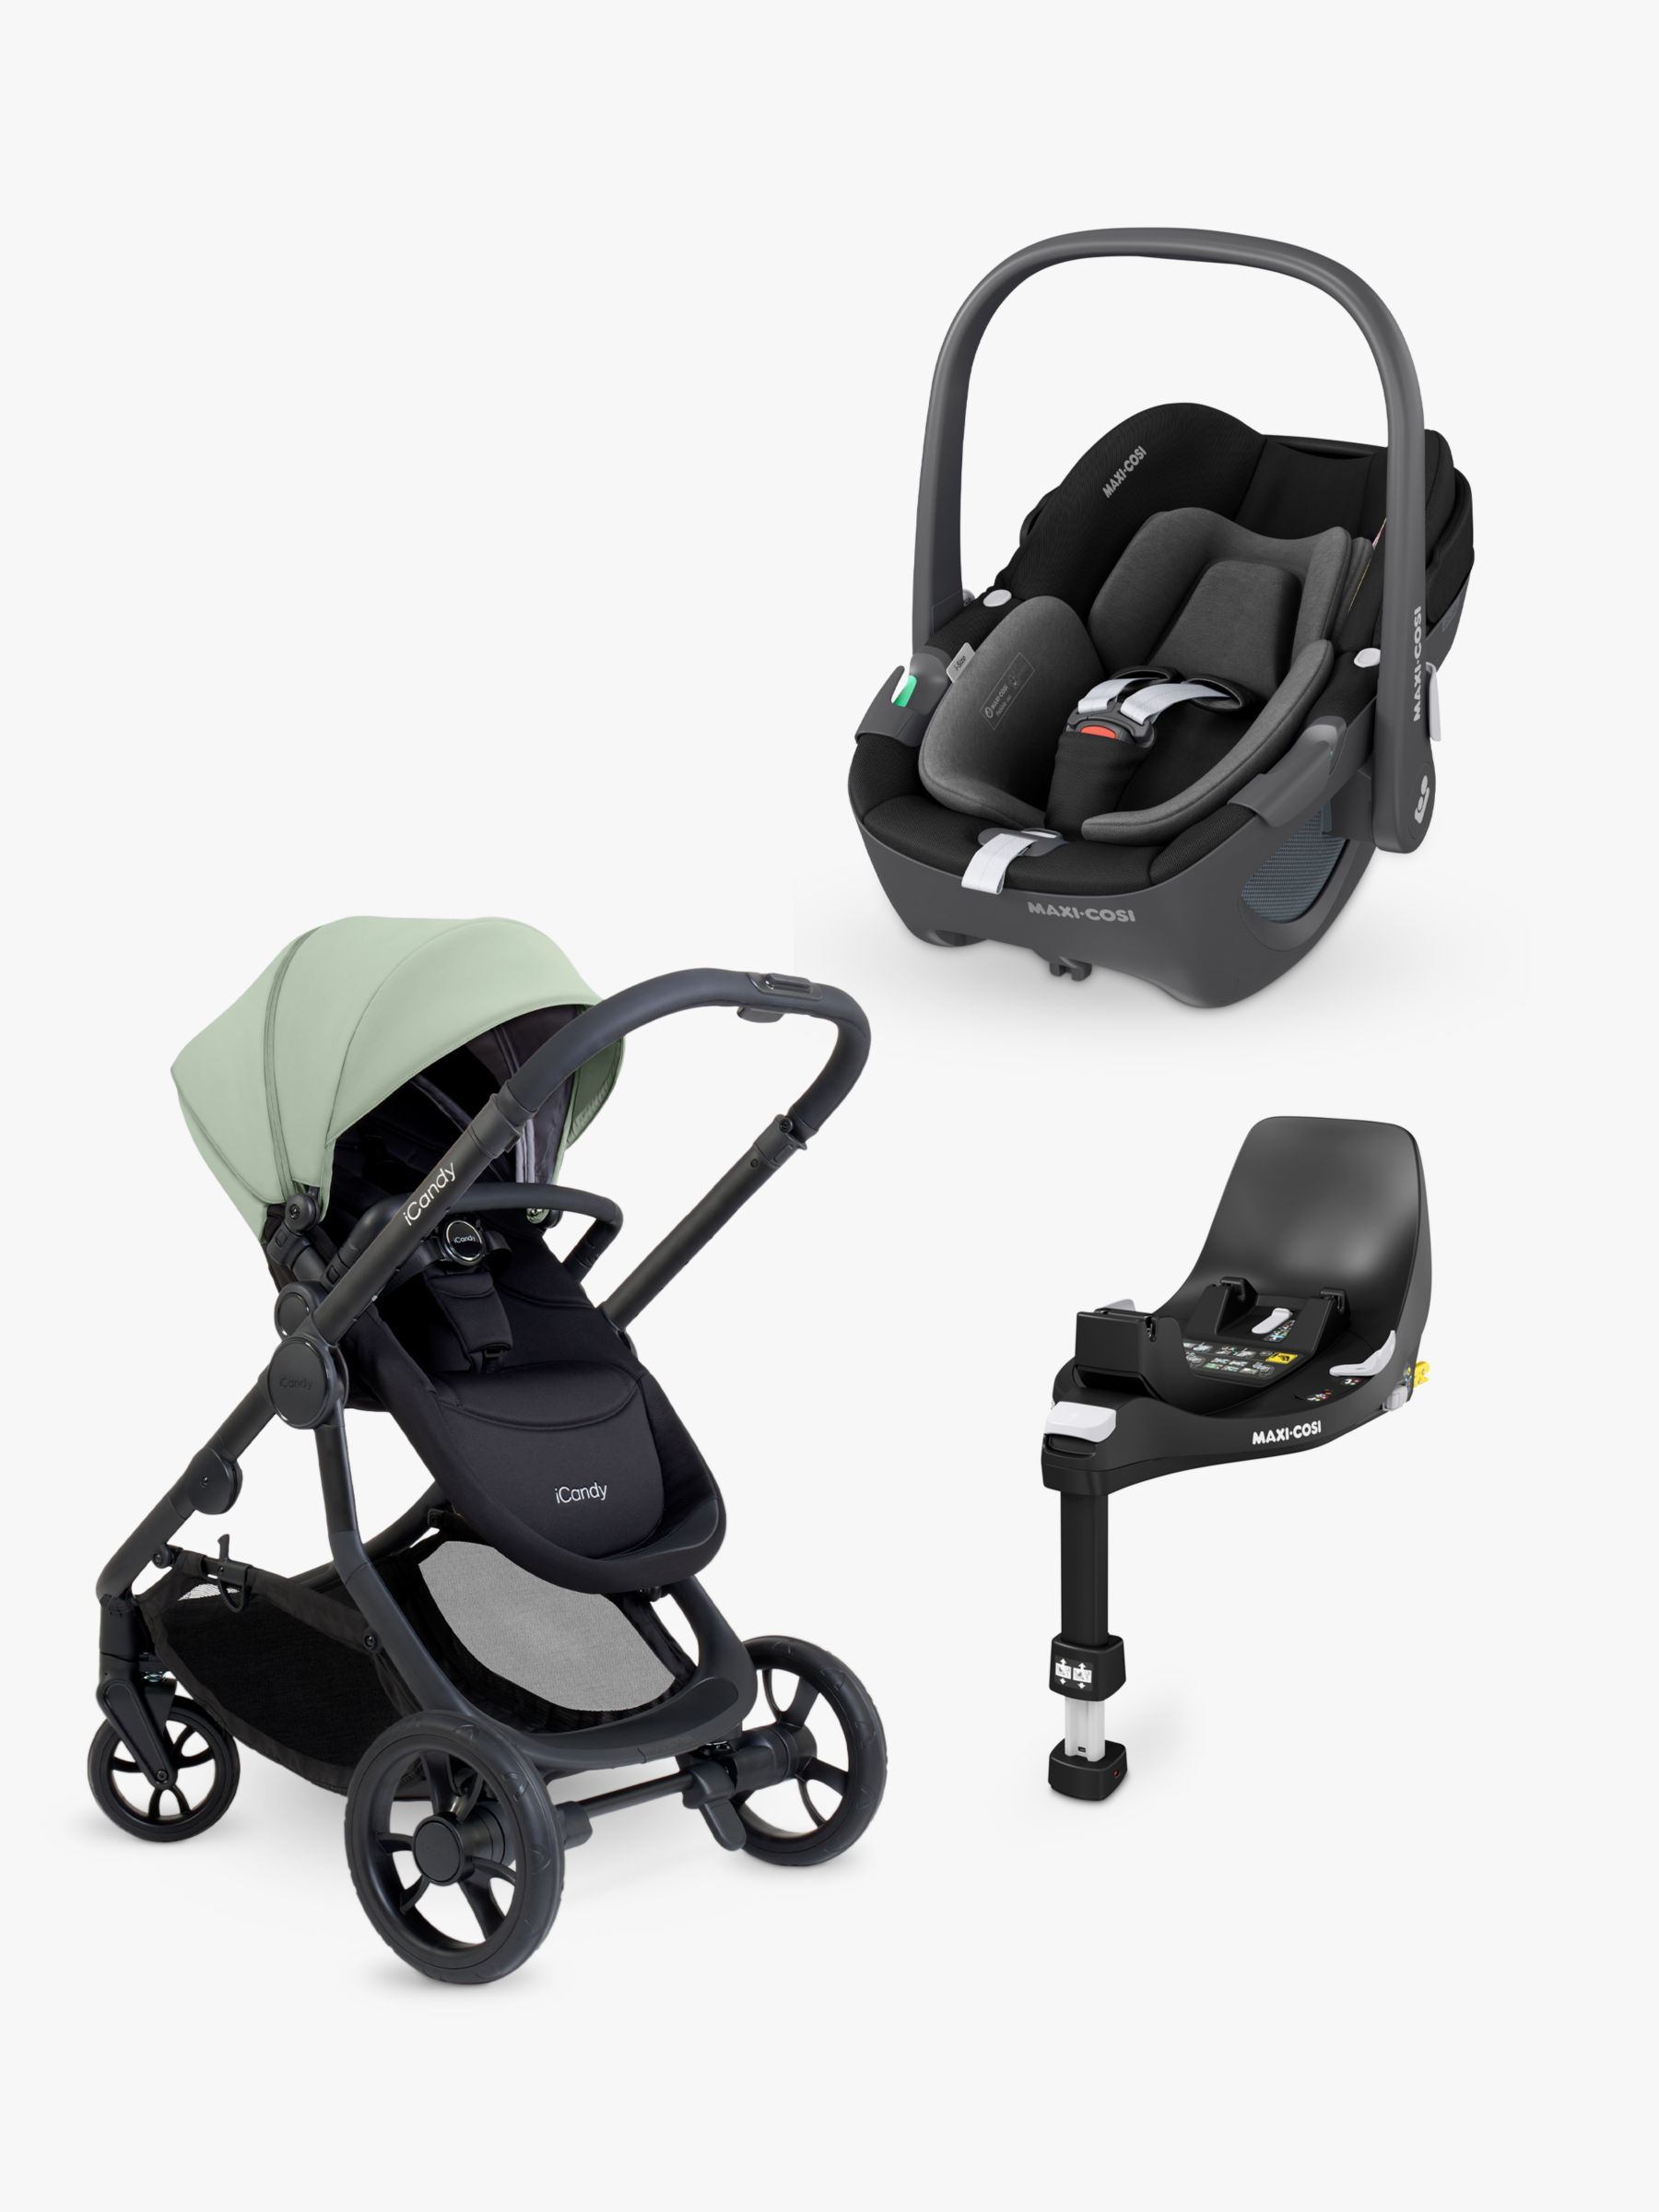 iCandy 4 Pushchair with Maxi-Cosi Pebble 360 i-Size Baby Car Seat and FamilyFix 360 ISOFIX base Bundle, Pistachio/ Essential